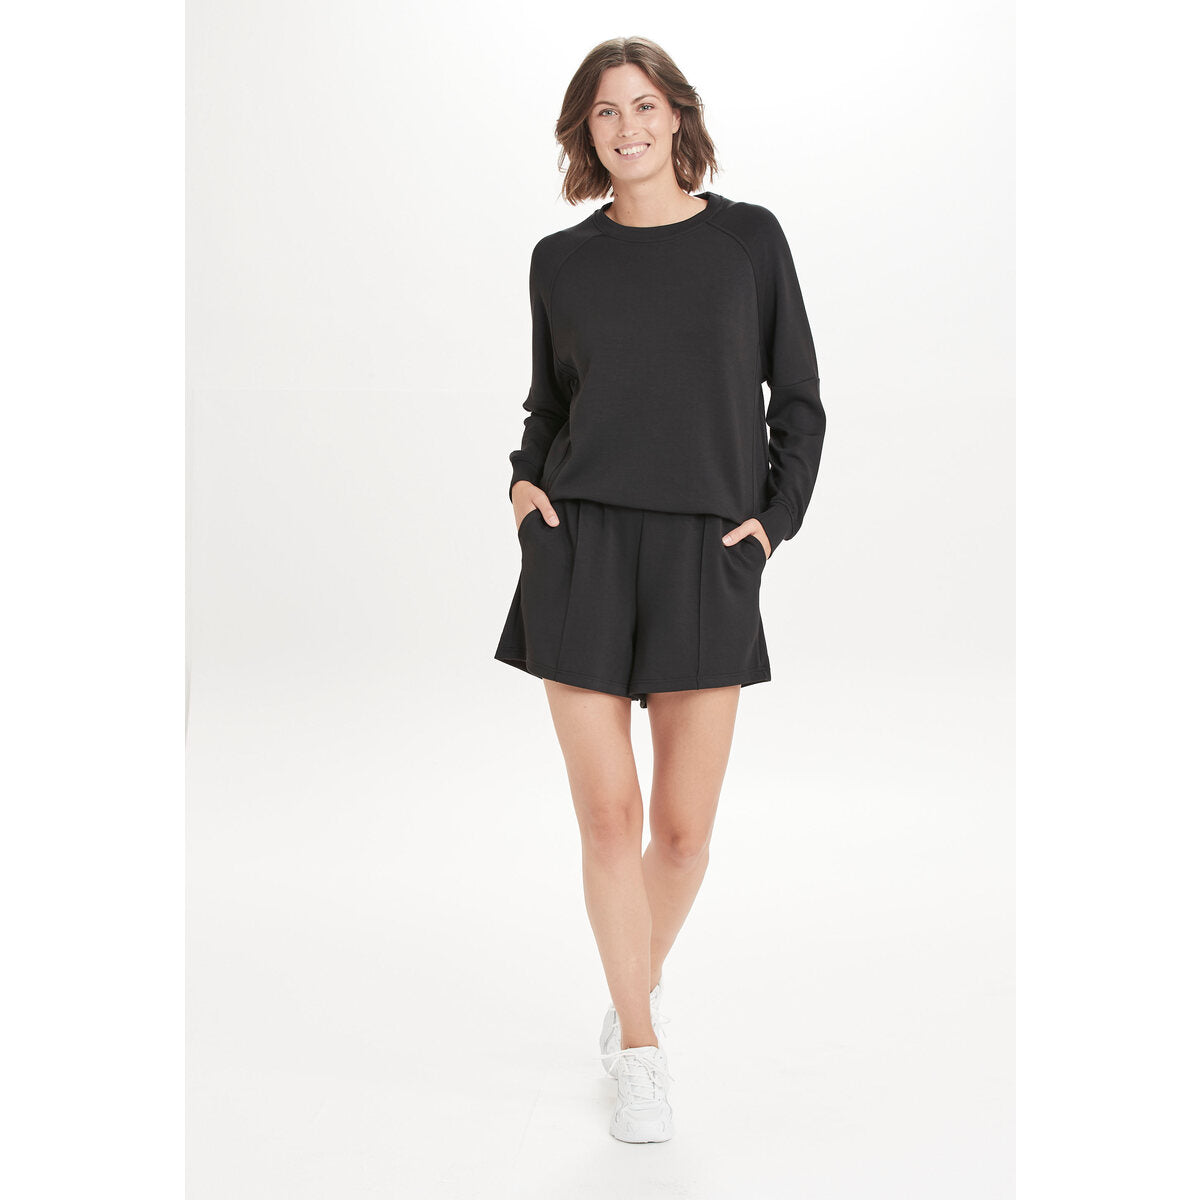 Athlecia Jacey Womenswear High Waisted Lounge Shorts - Black 1 Shaws Department Stores